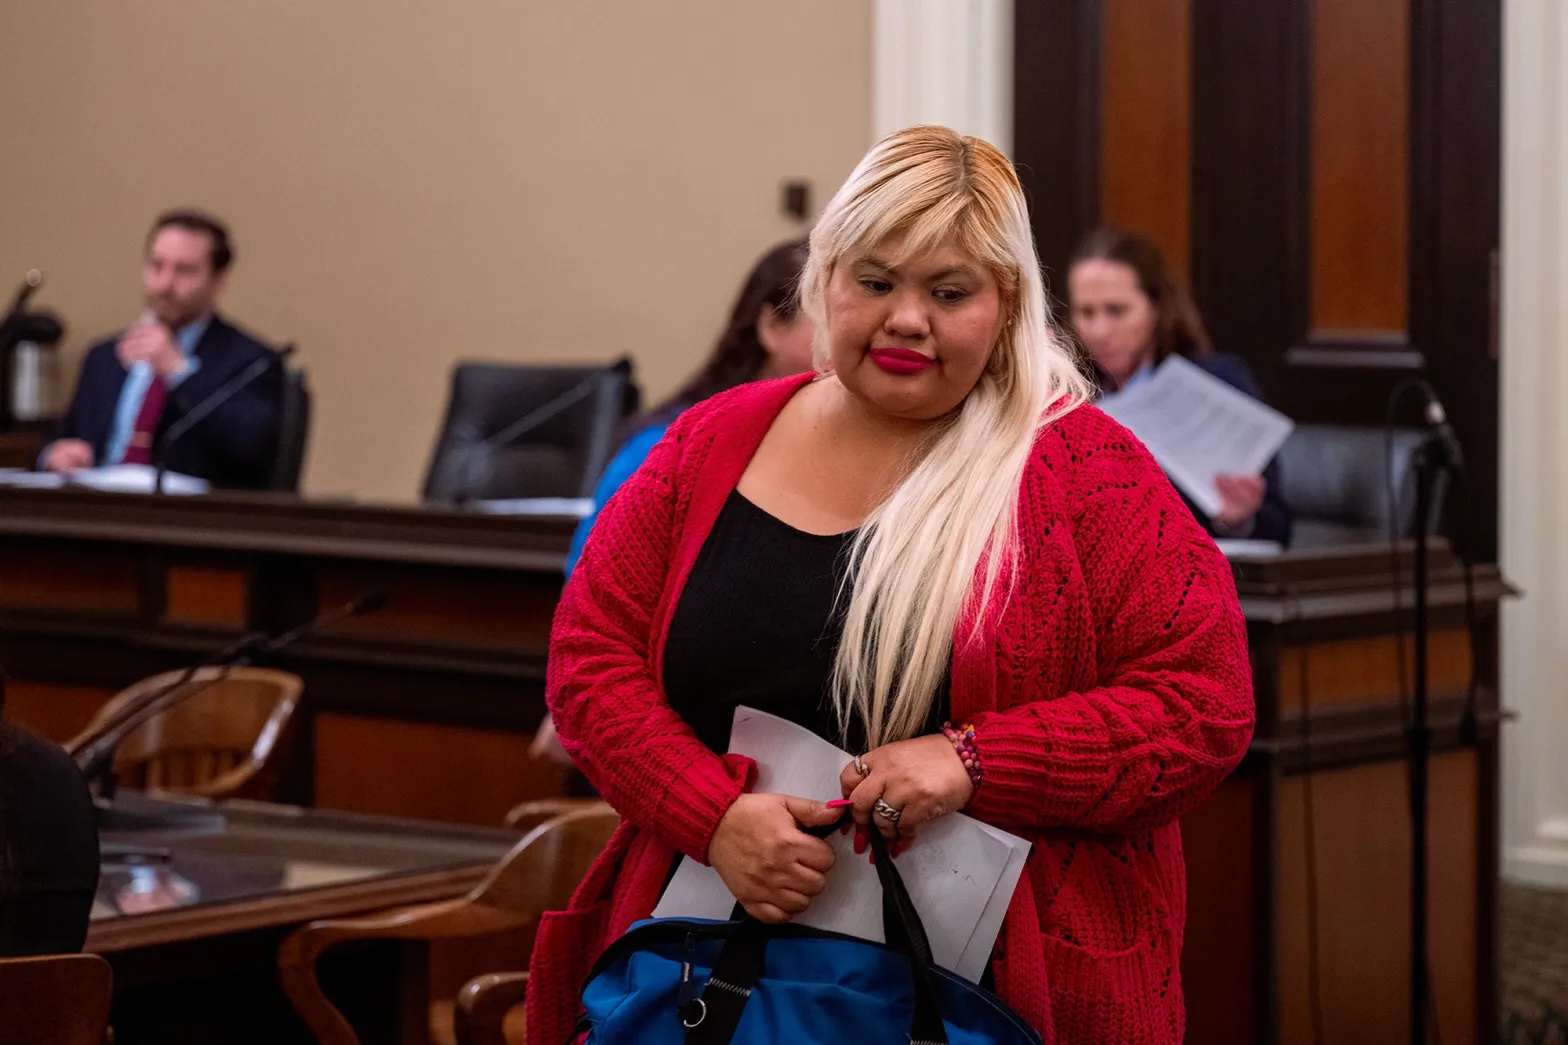 A woman with blond hair and a red cardigan stands in court, looking toward the floor.